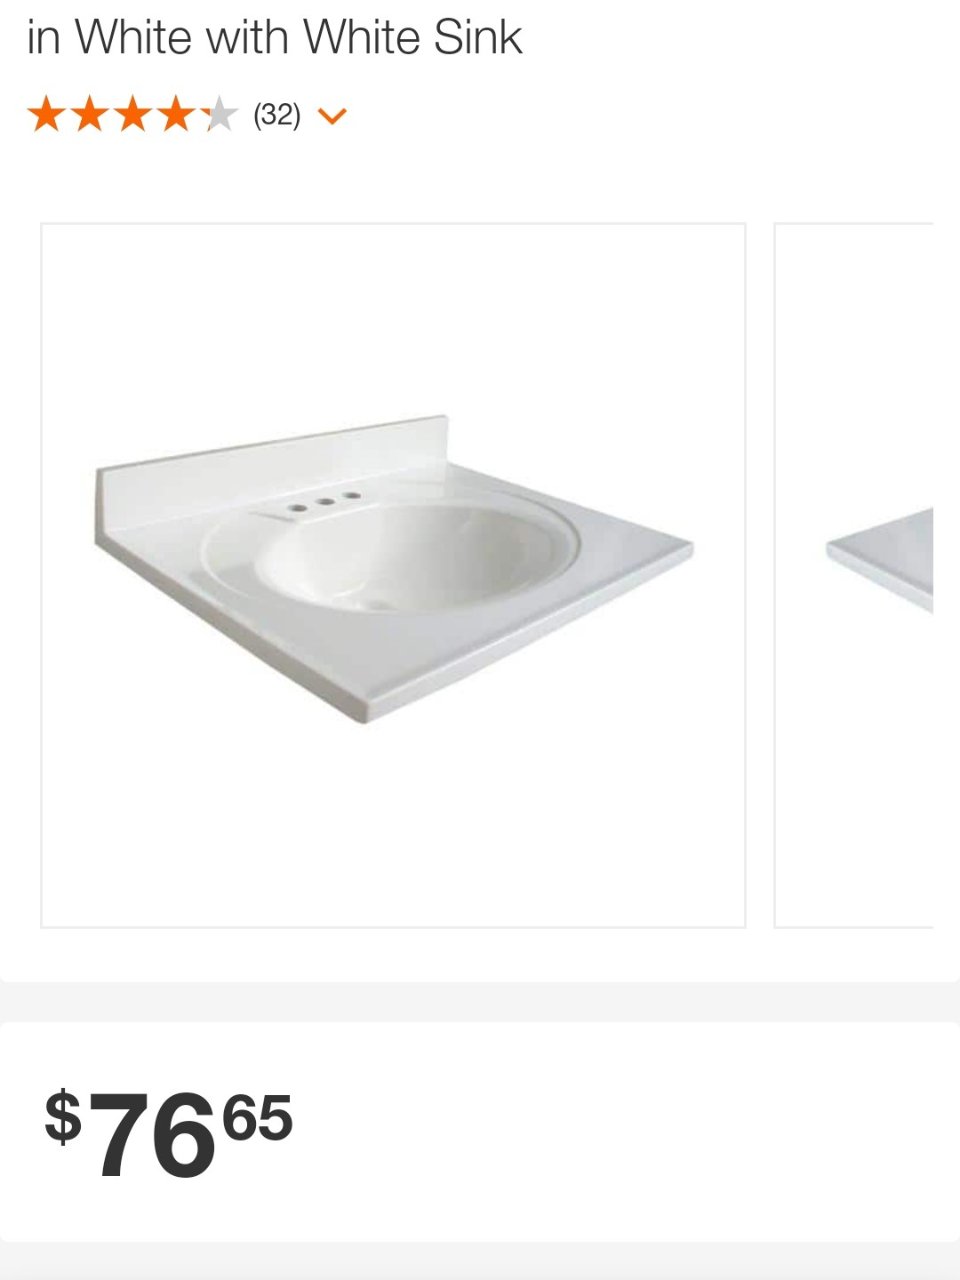 Search Results for white sink at The Home Depot